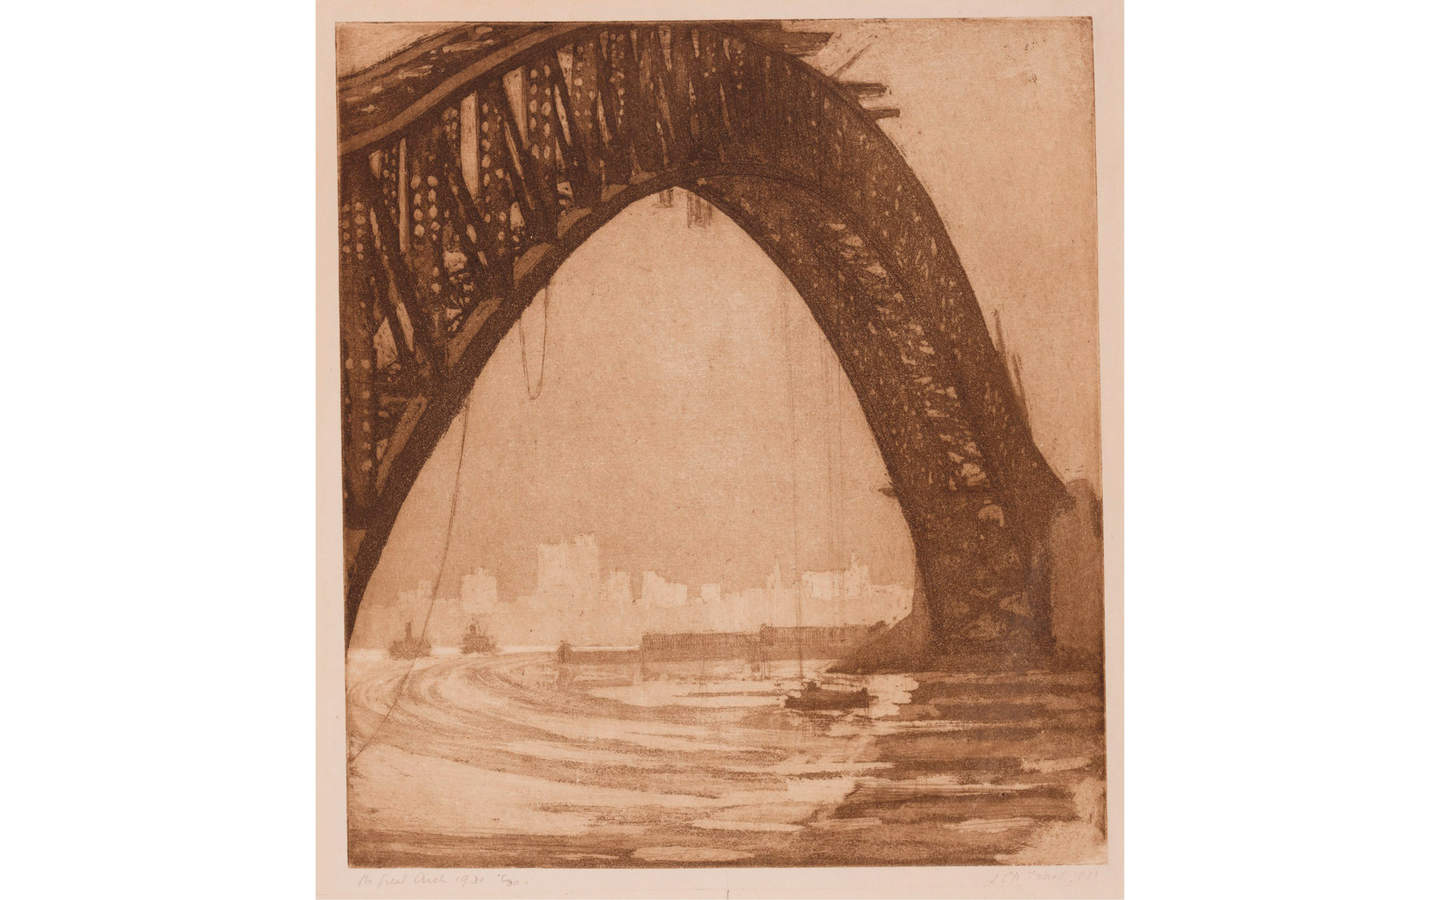 Sepia toned etching of the Sydney Harbour bridge in construction.